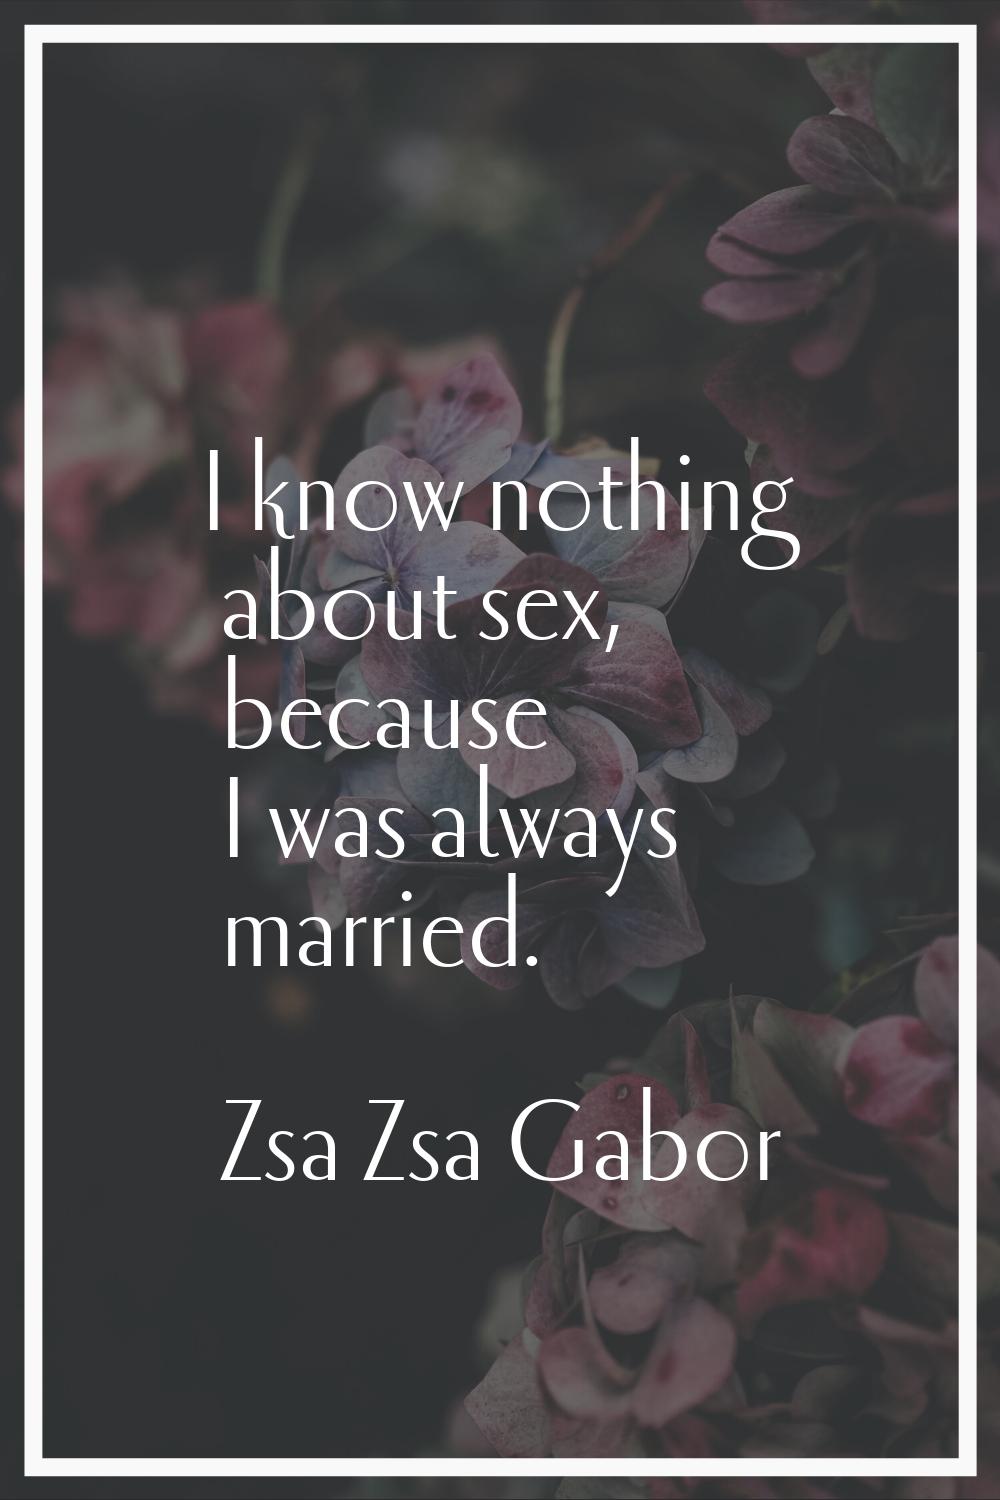 I know nothing about sex, because I was always married.